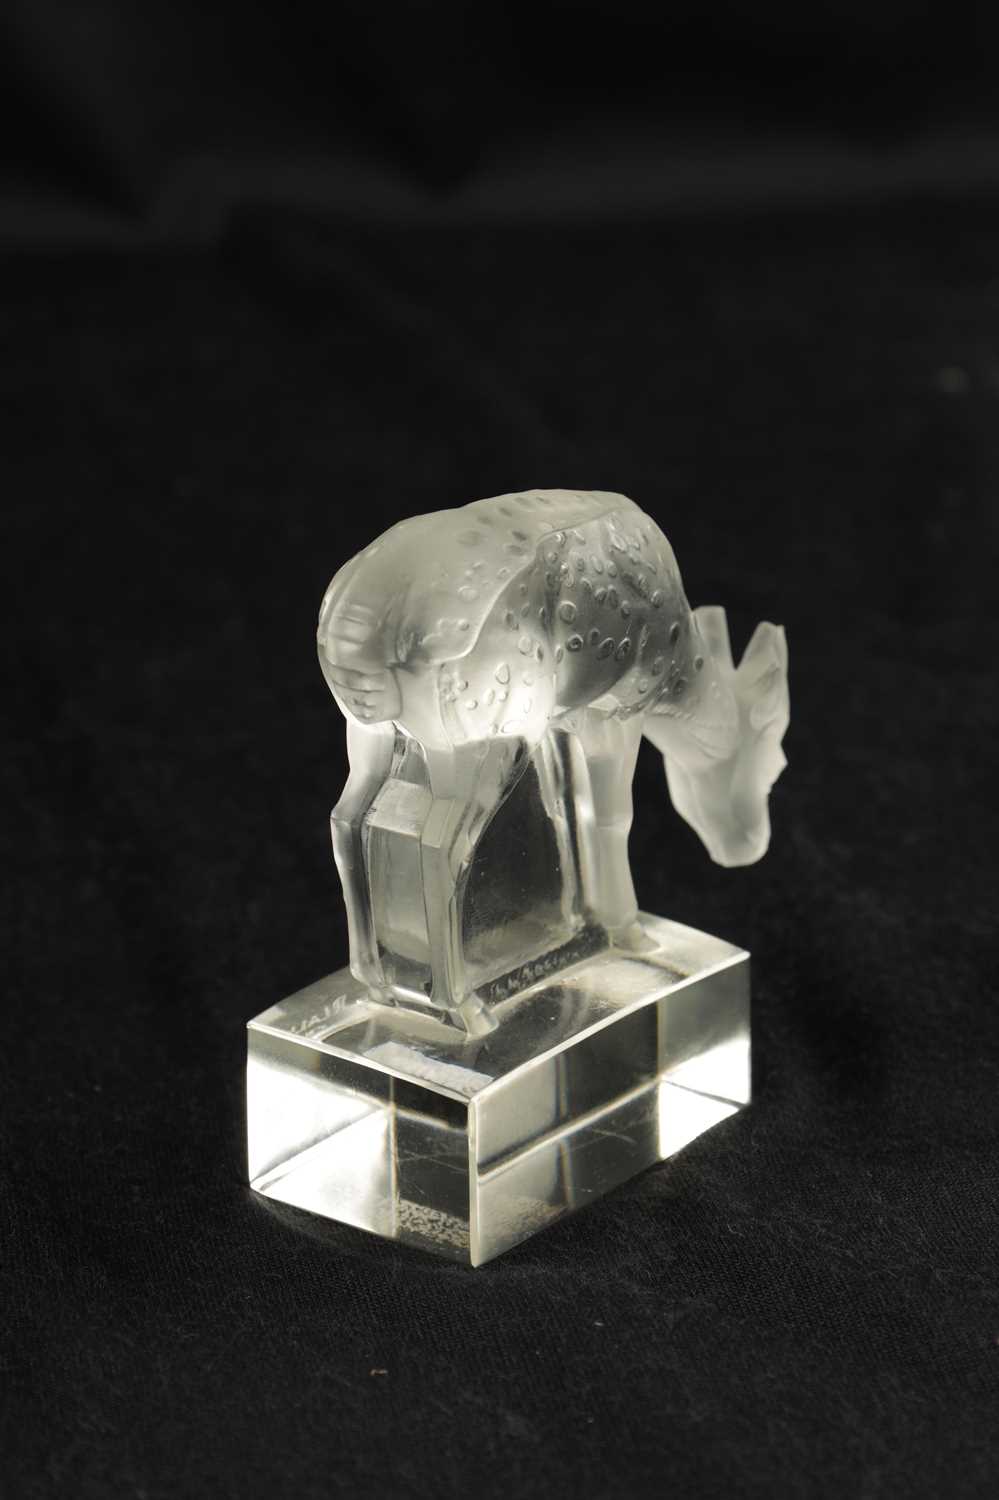 A LALIQUE CLEAR GLASS PAPERWEIGHT OF A DEER - Image 4 of 5